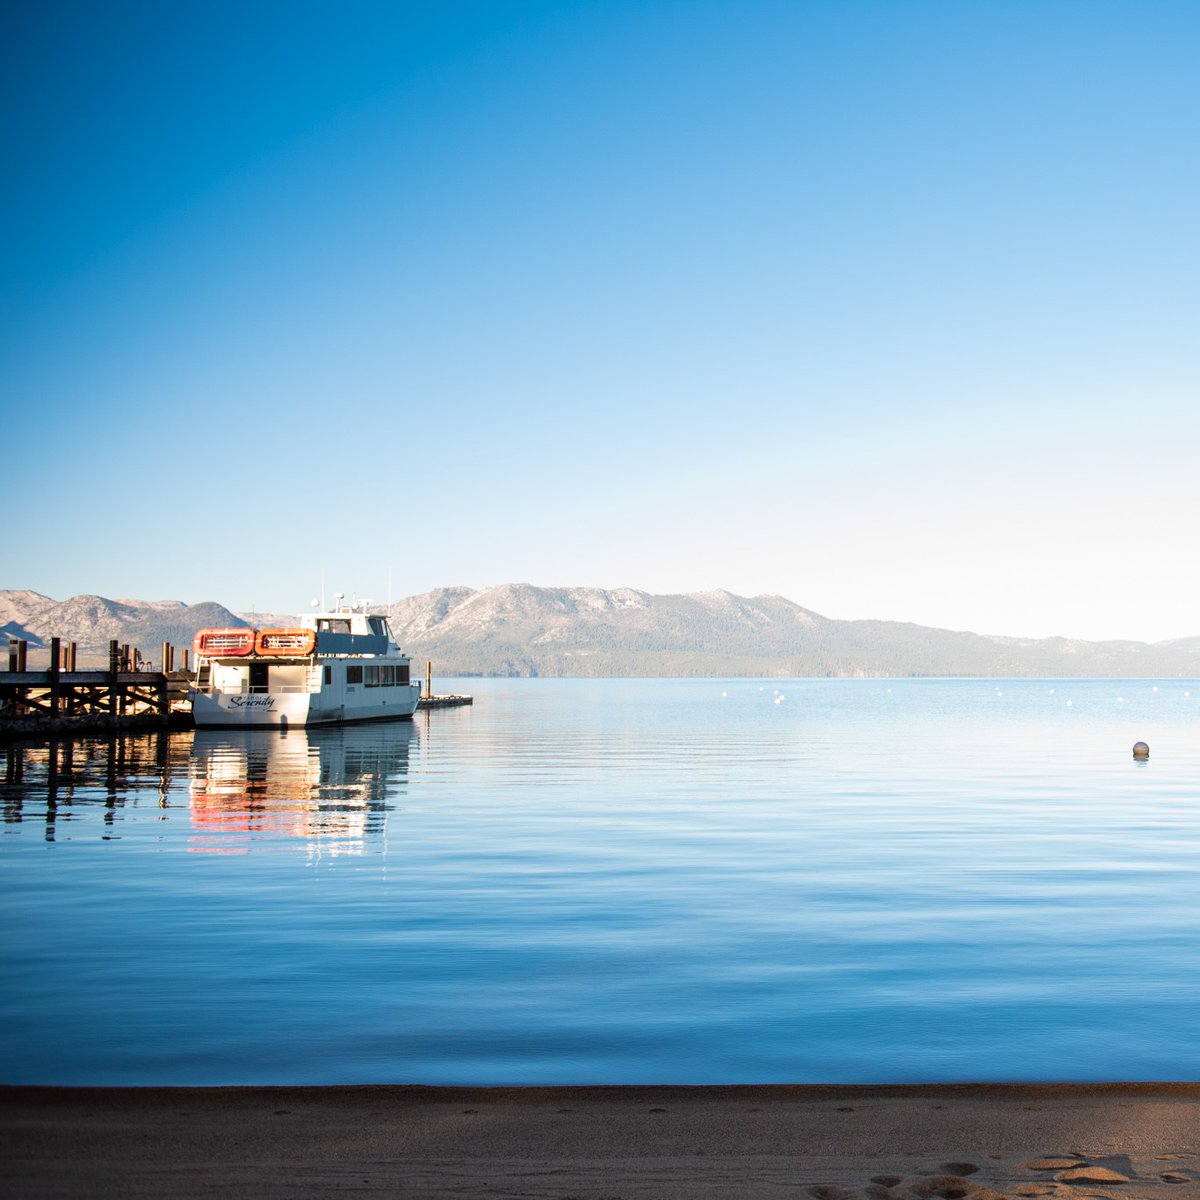 Fun Fact: In the summer the lakes upper 12 ft can warm up to around 68 degrees fahrenheit. However, in the winter Lake Tahoe never freezes b/c it maintains a constant 39 degrees below 700 ft due to constant water movemetn & the volume of water.

#laketahoe #tahoesouth #funfacts